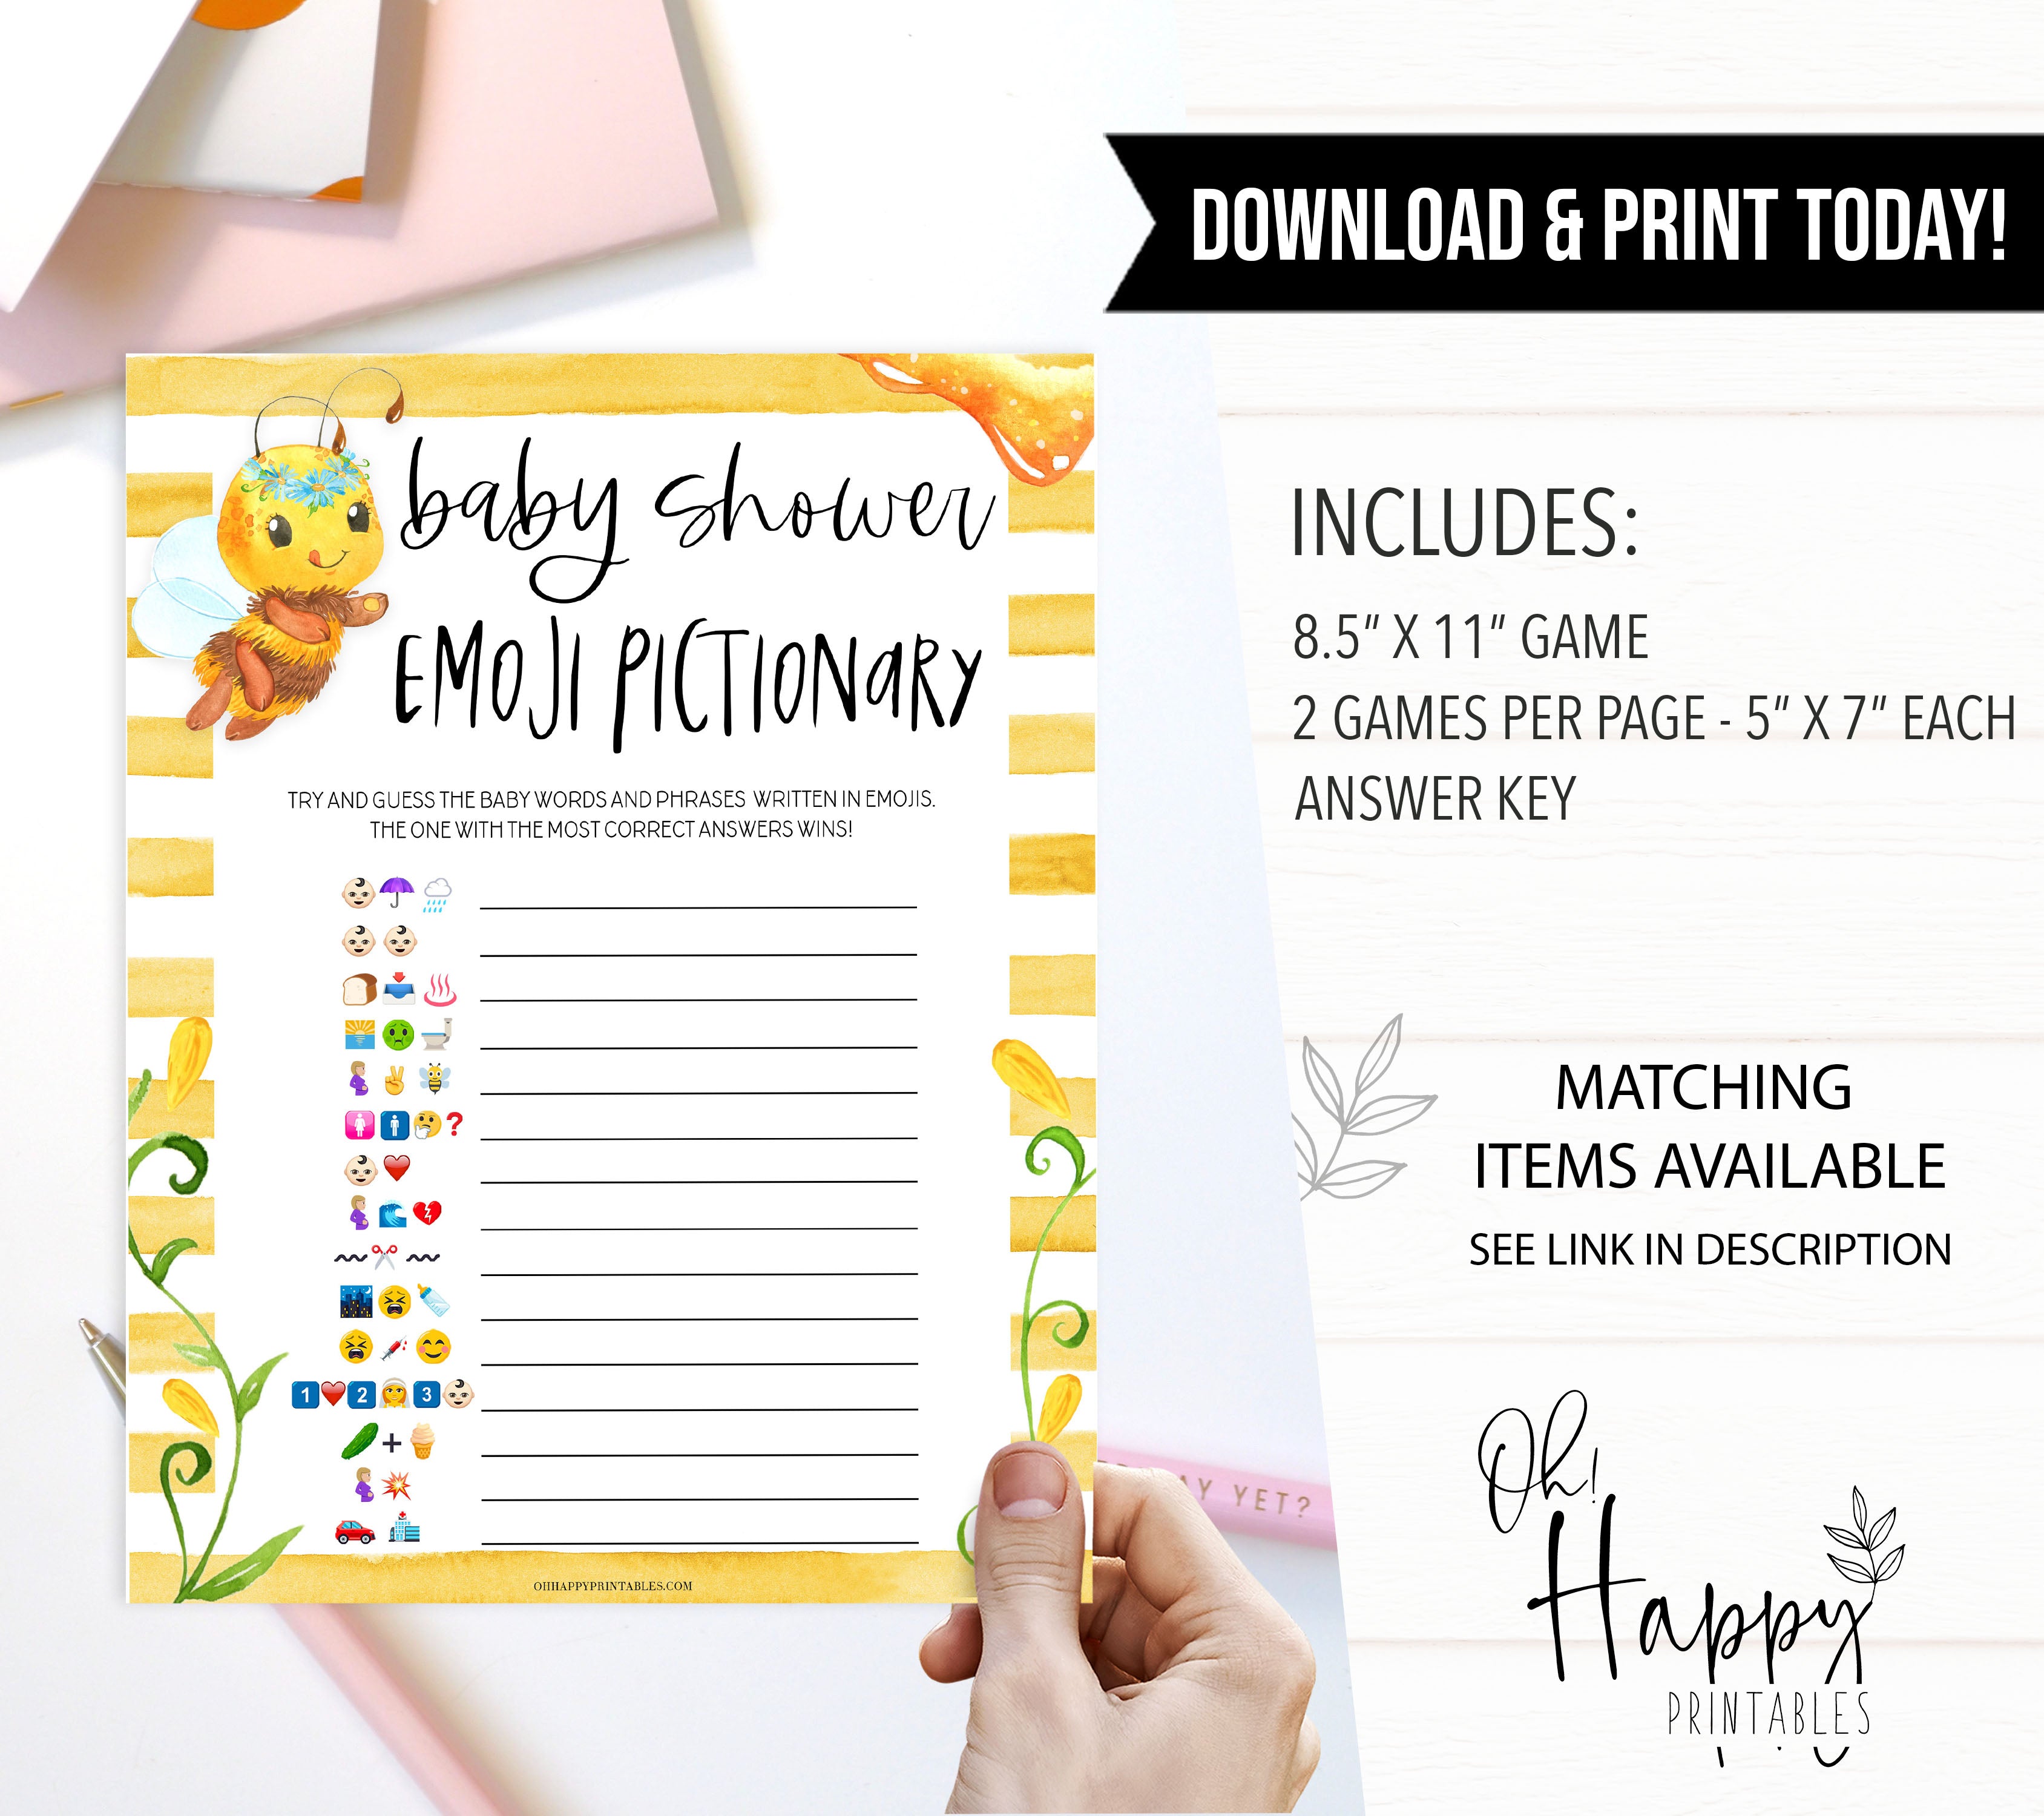 baby shower emoji pictionary game, emoji pictionary, Printable baby shower games, mommy bee fun baby games, baby shower games, fun baby shower ideas, top baby shower ideas, mommy to bee baby shower, friends baby shower ideas